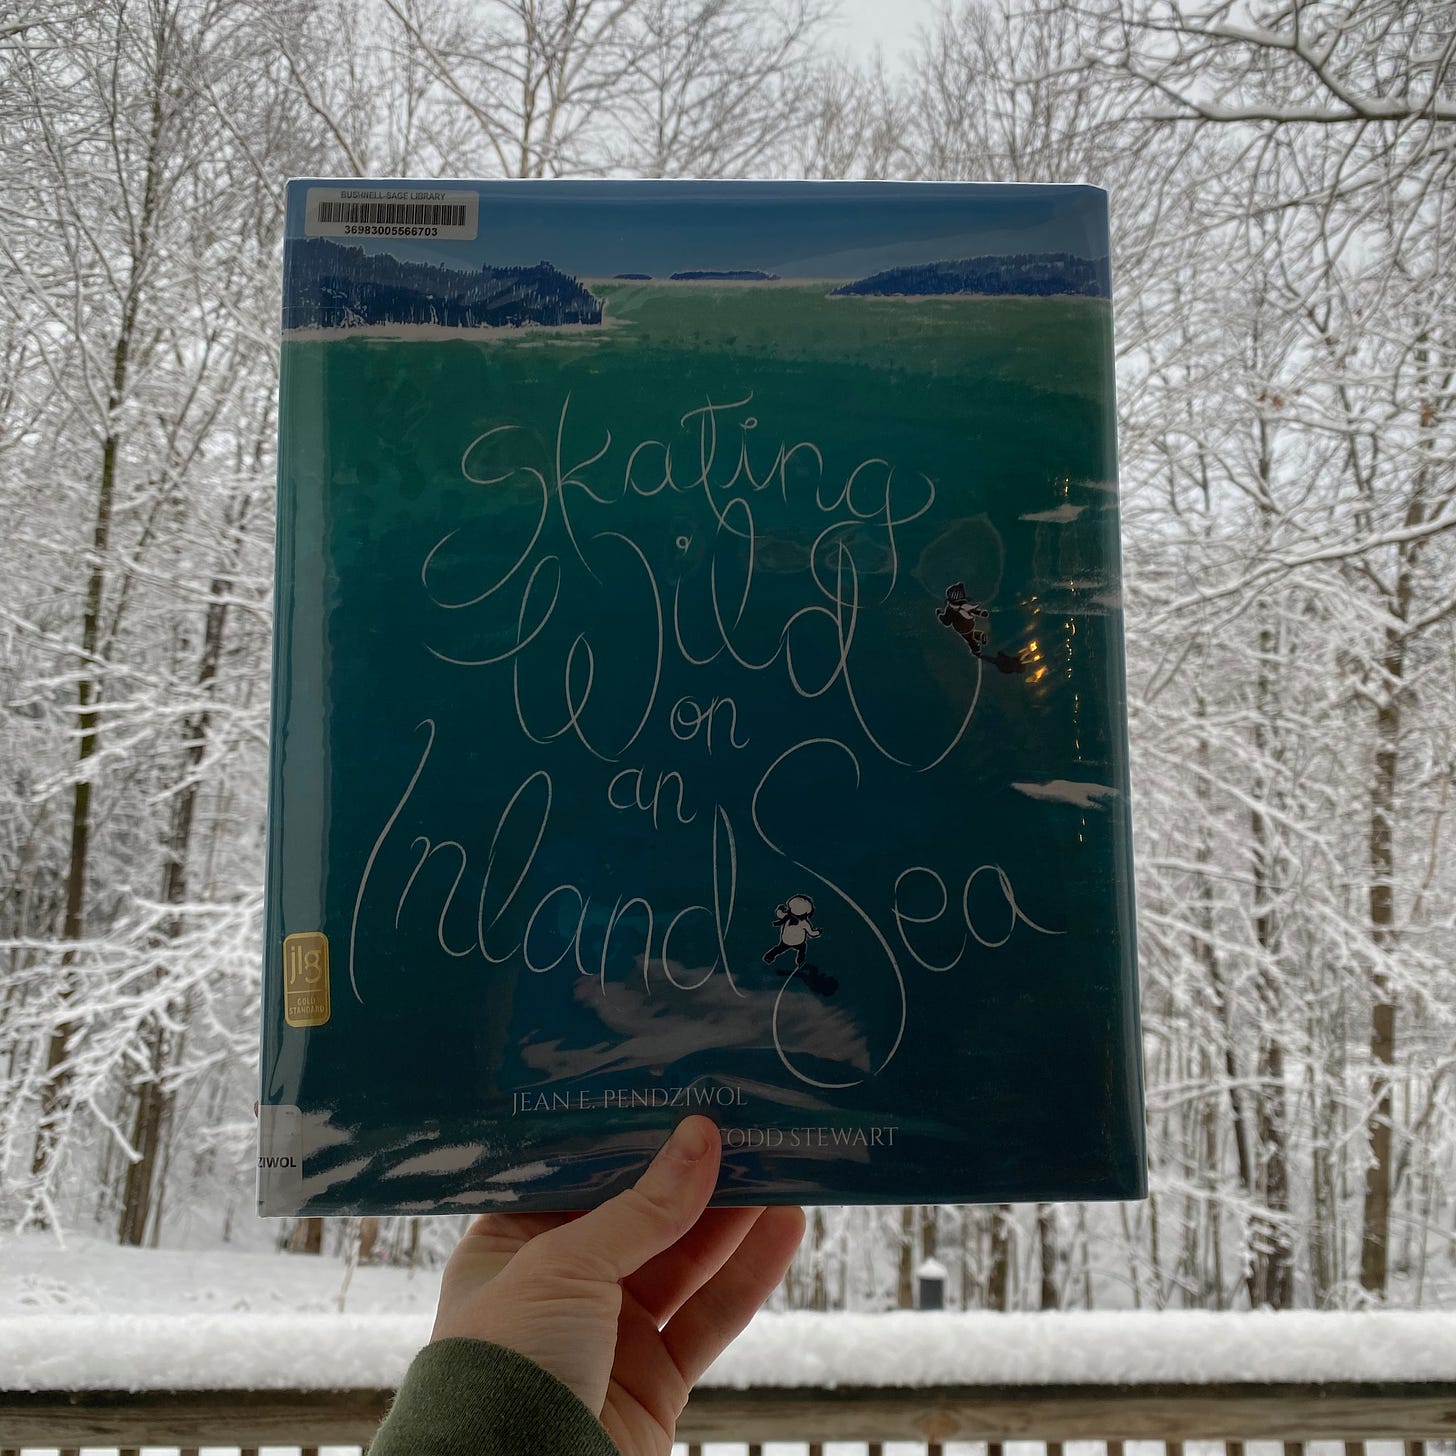 I’m holding this book up against a backdrop of snowy trees.